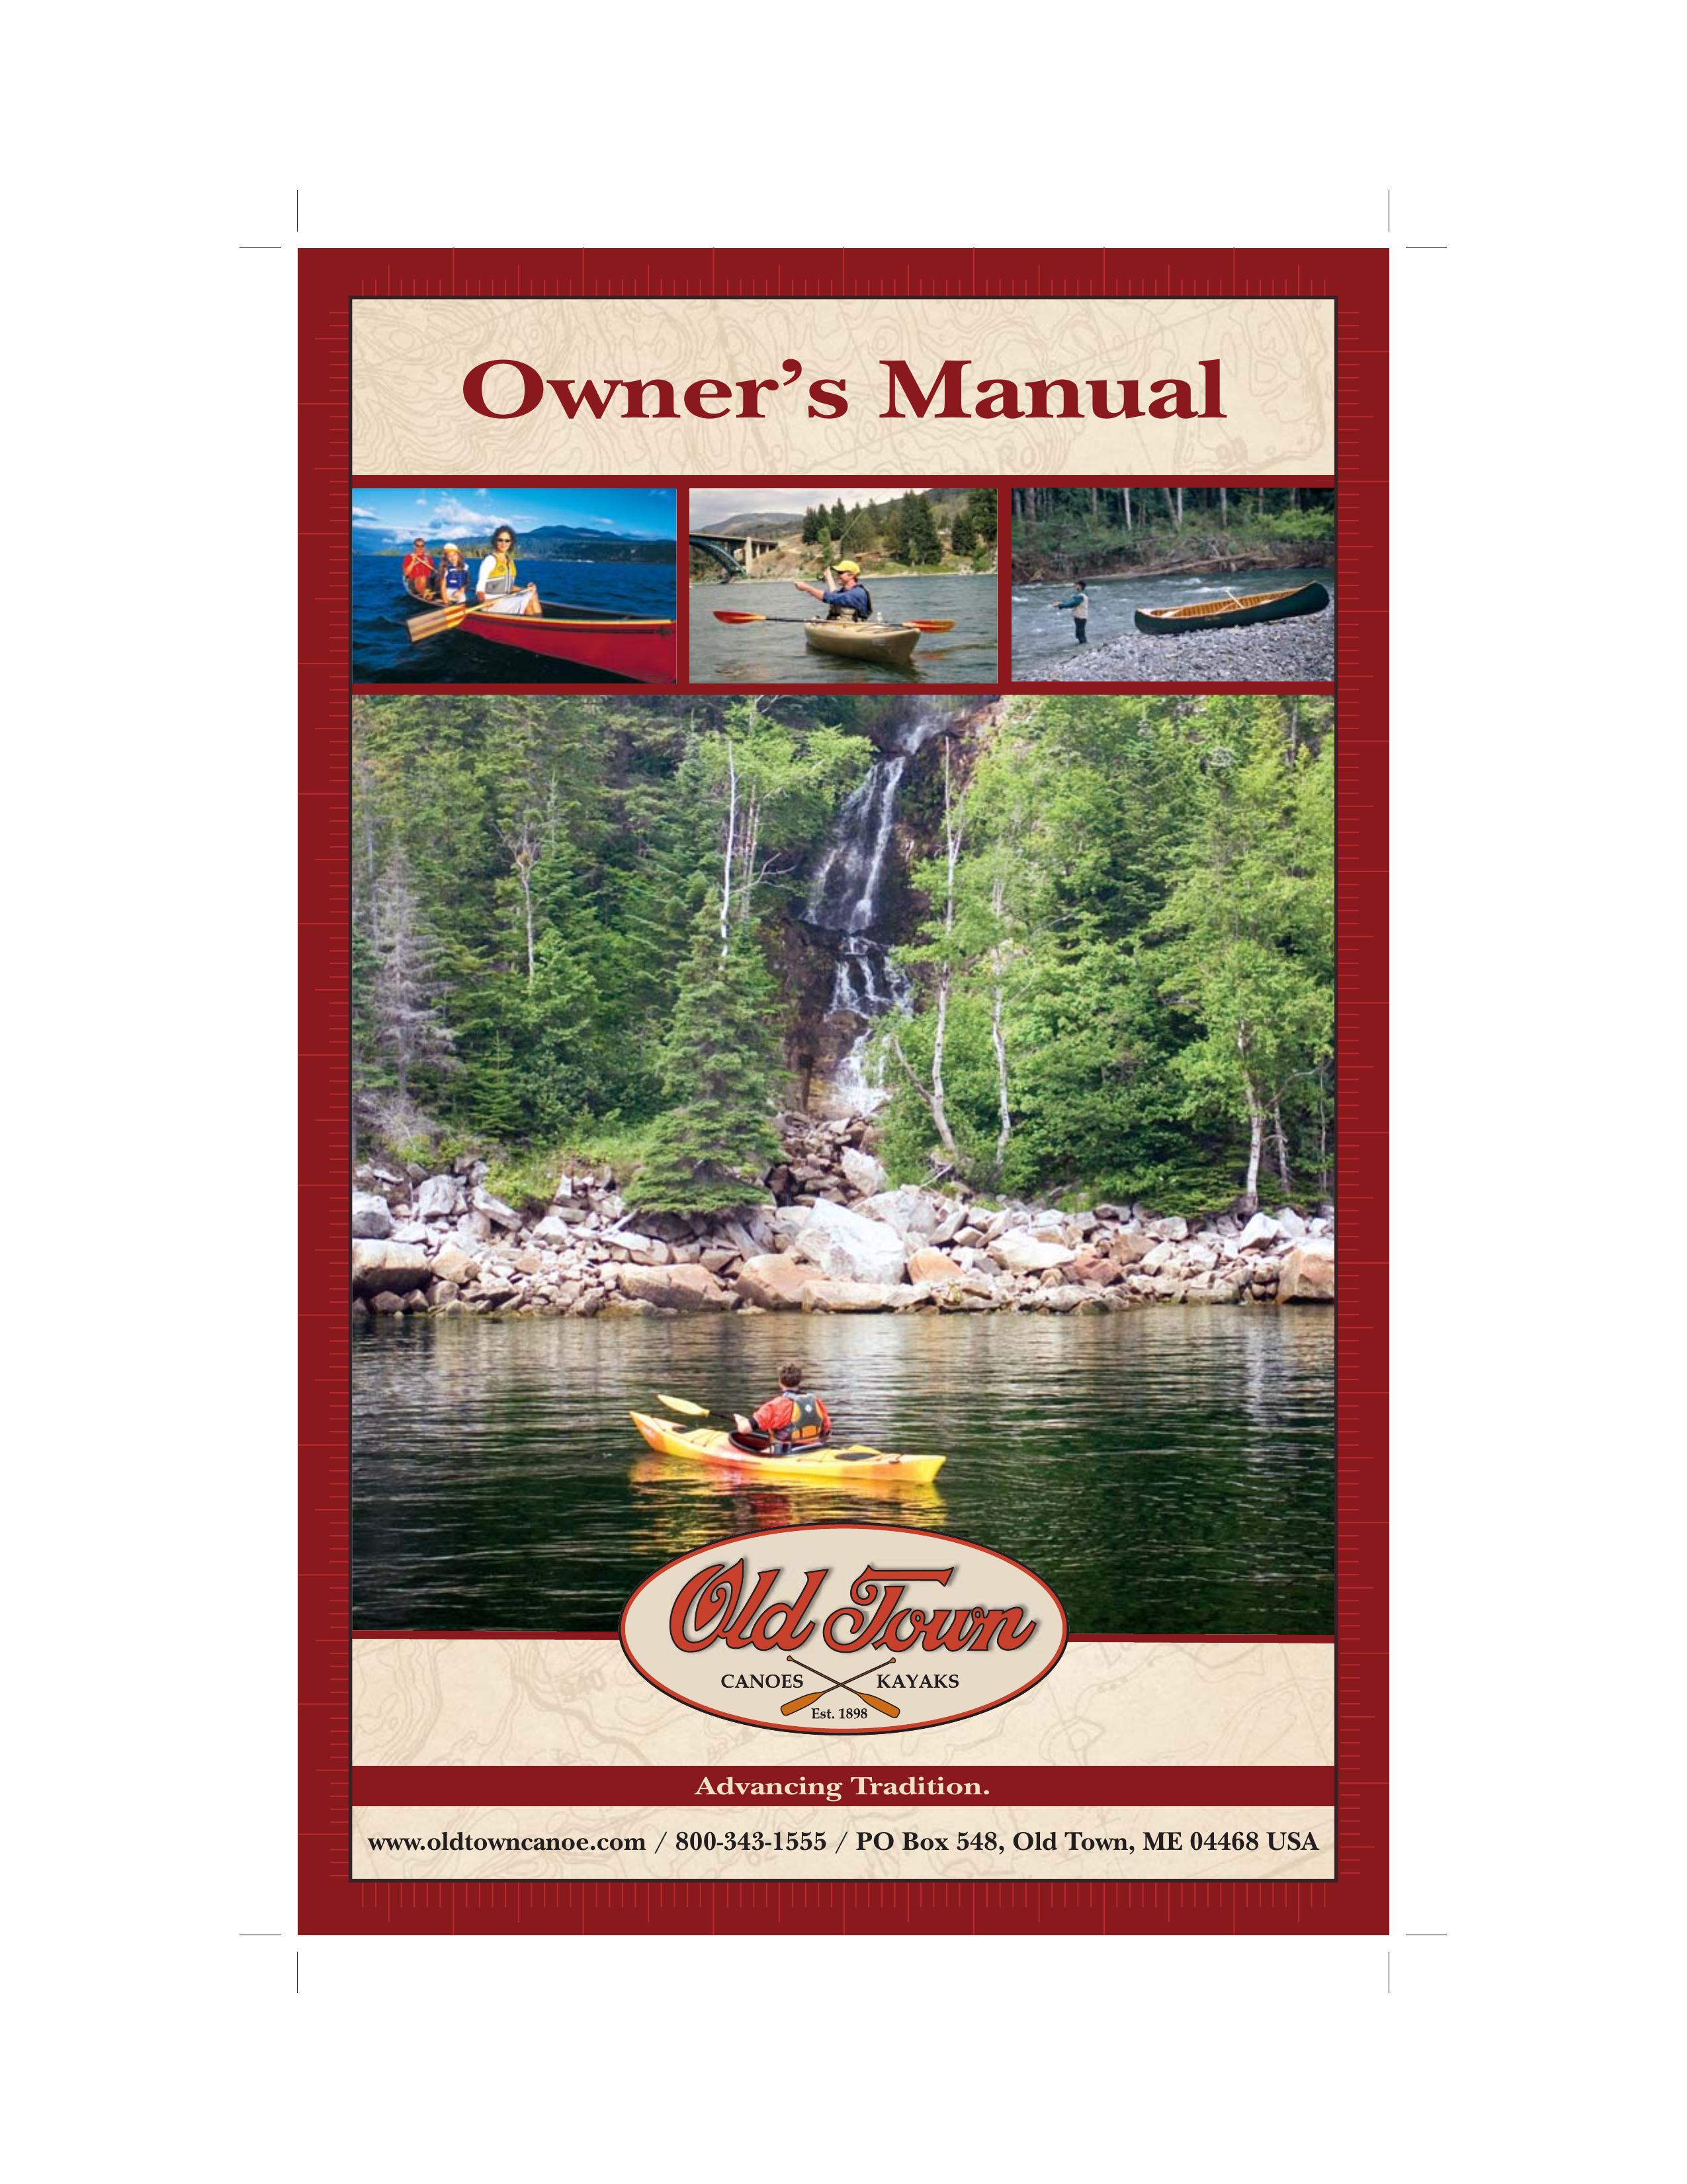 Old Town Canoe Co. 01.1315.2380 Boat User Manual